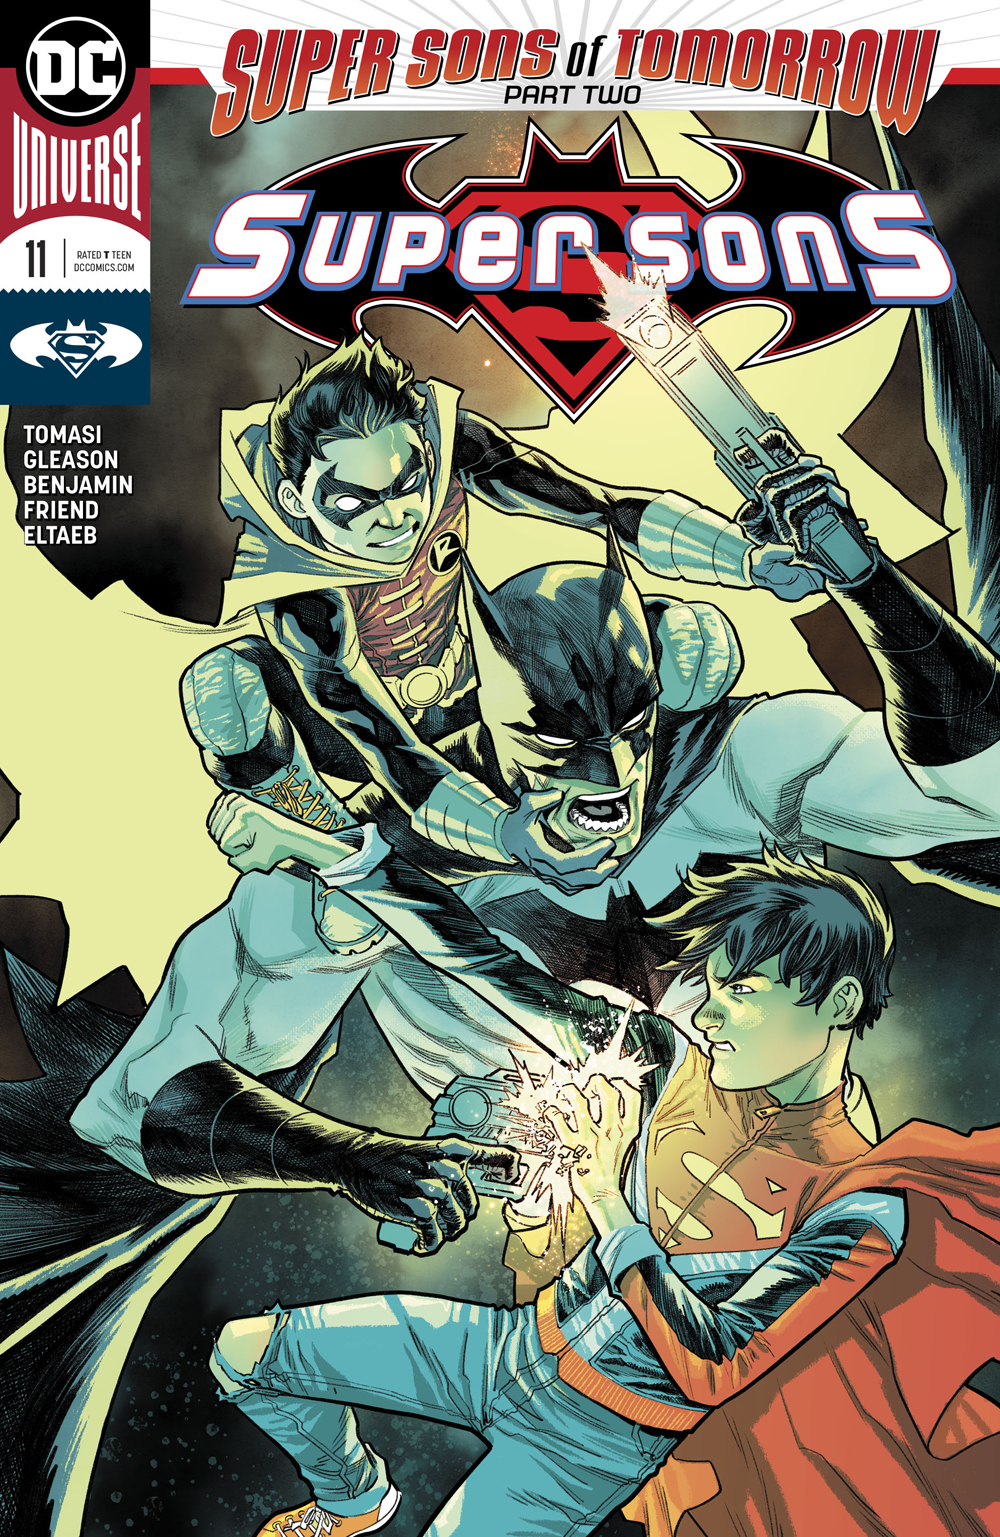 SUPER SONS #11 (SONS OF TOMORROW)